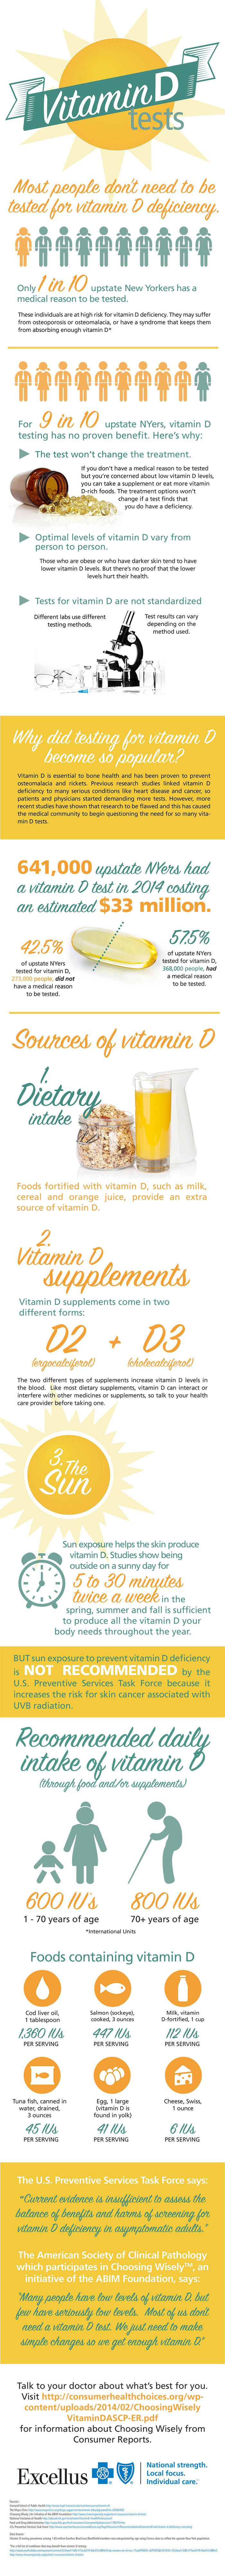 Most people don't need to be tested for vitamin D deficiency. Most individuals receive enough vitamin D through supplements and their diets.